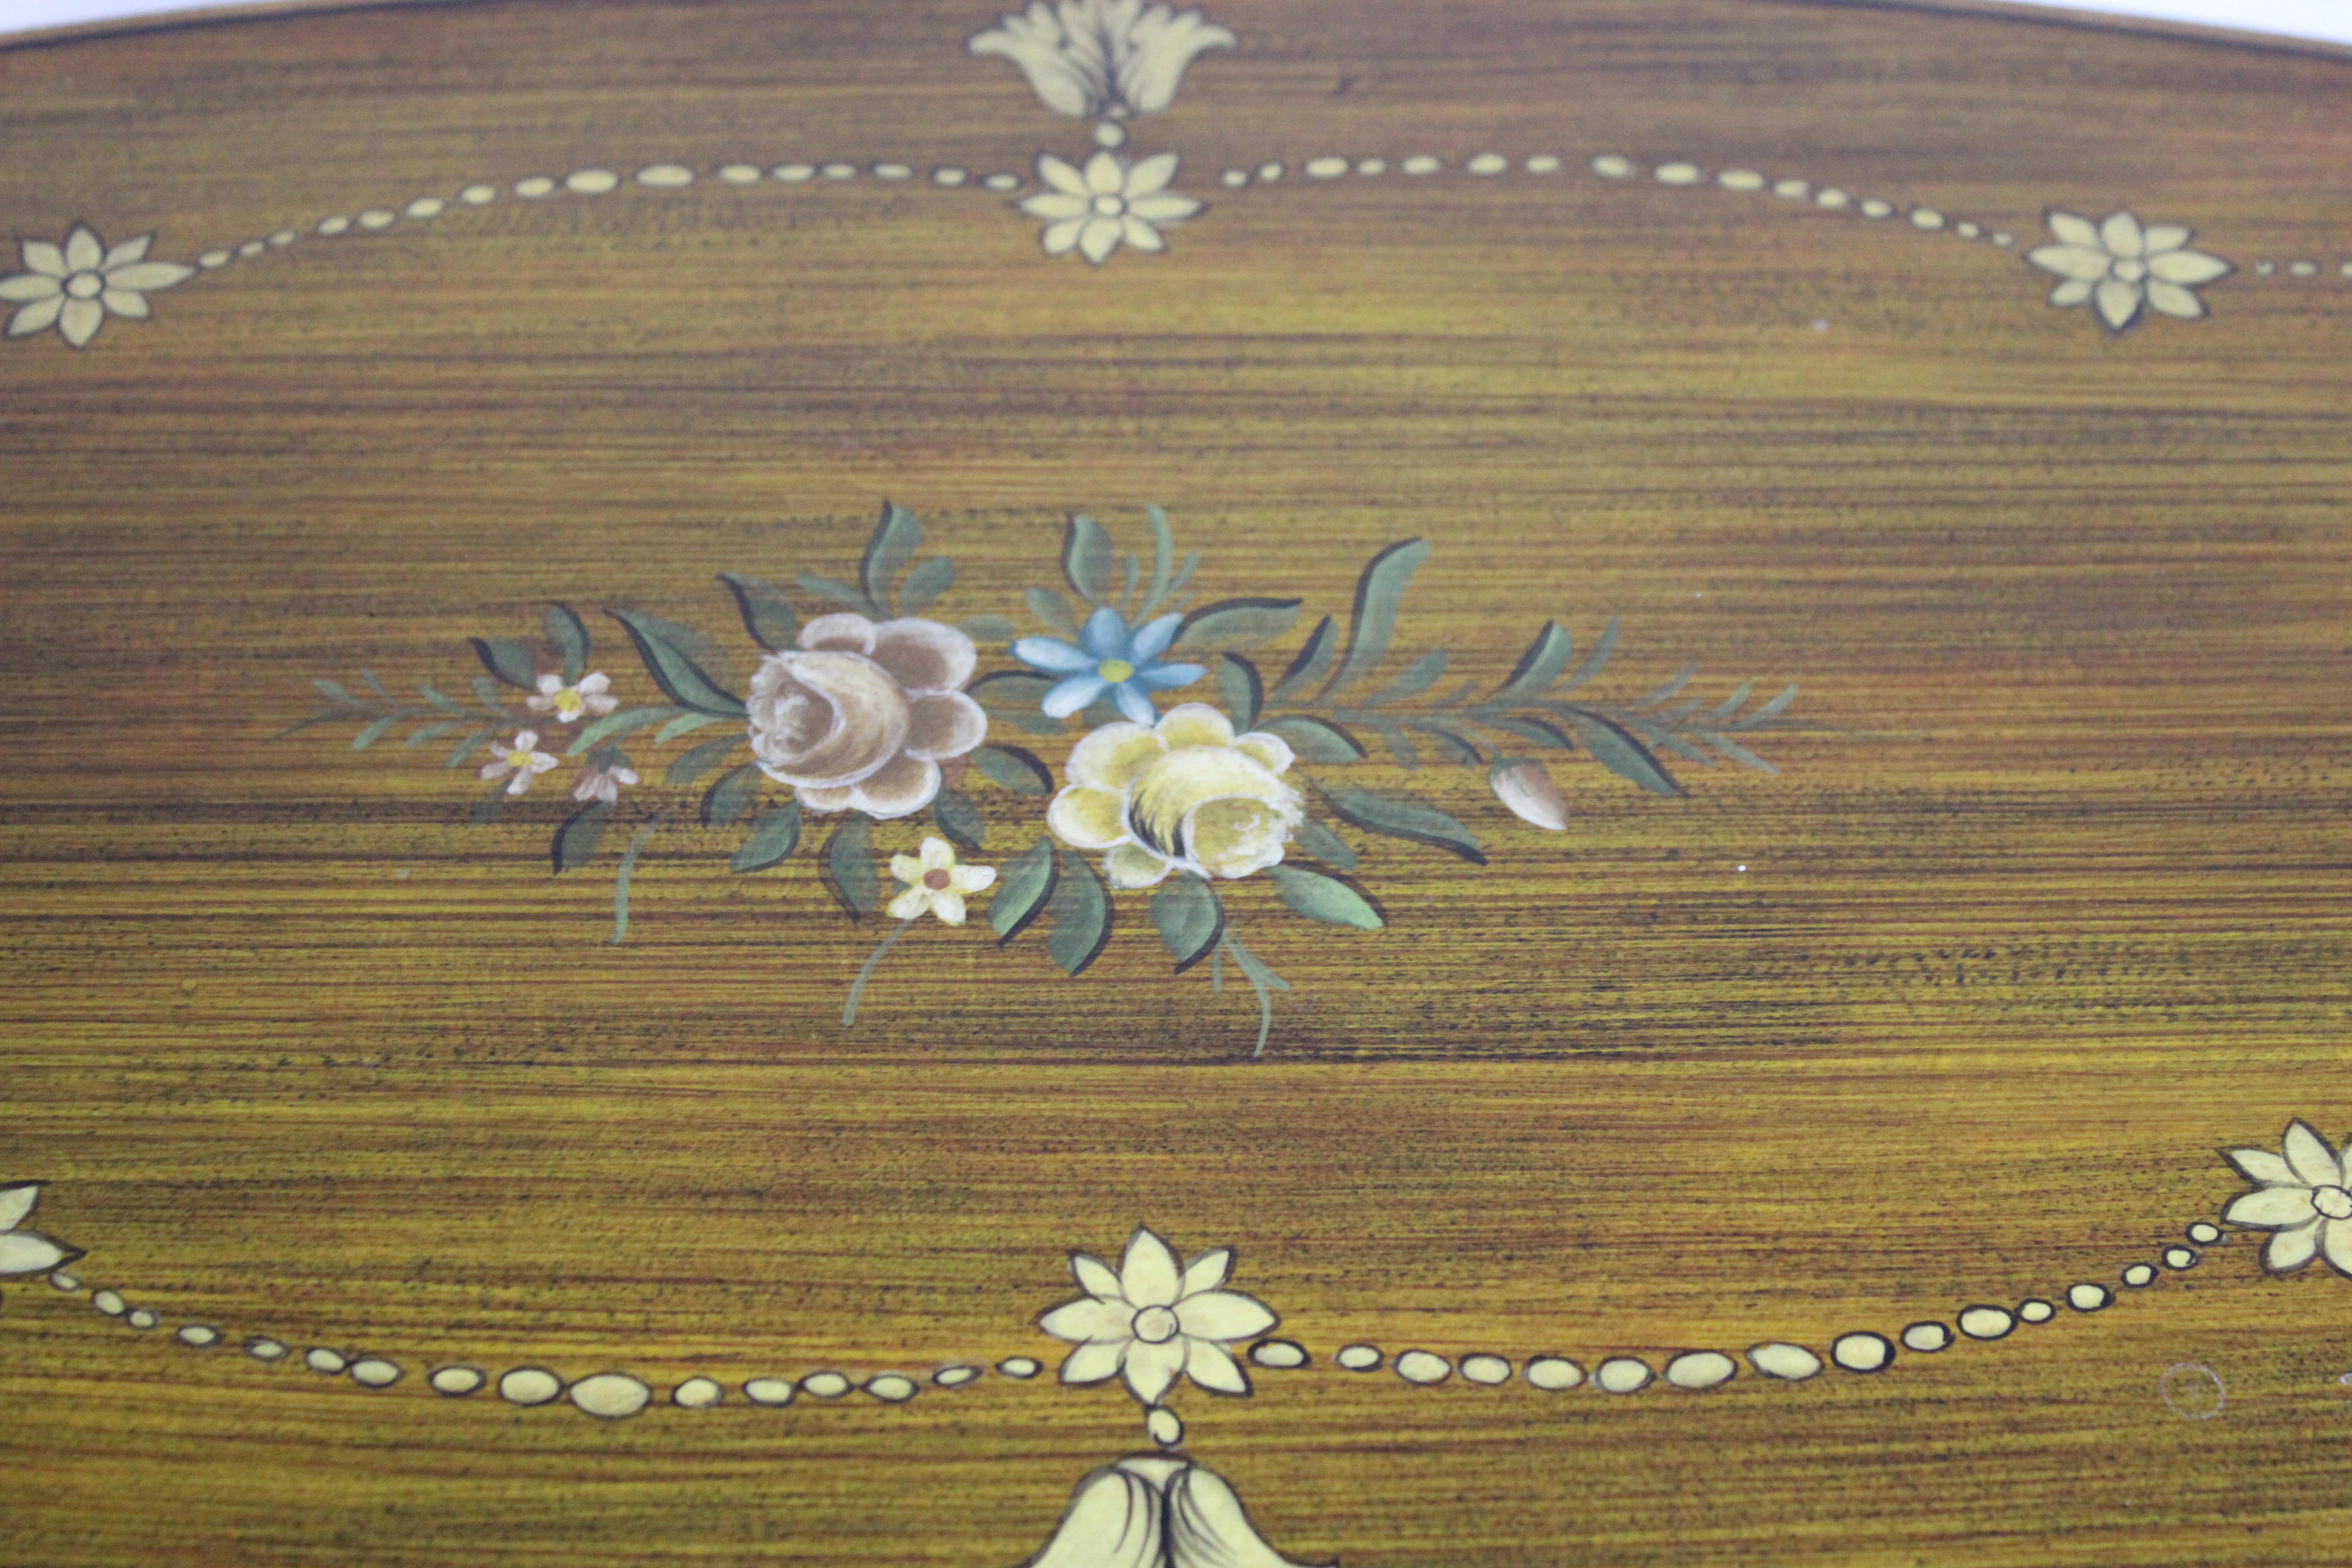 Sarreid Edwardian Oval Tray Top Étagère Table Sheraton Revival Floral Painted 35 For Sale 2